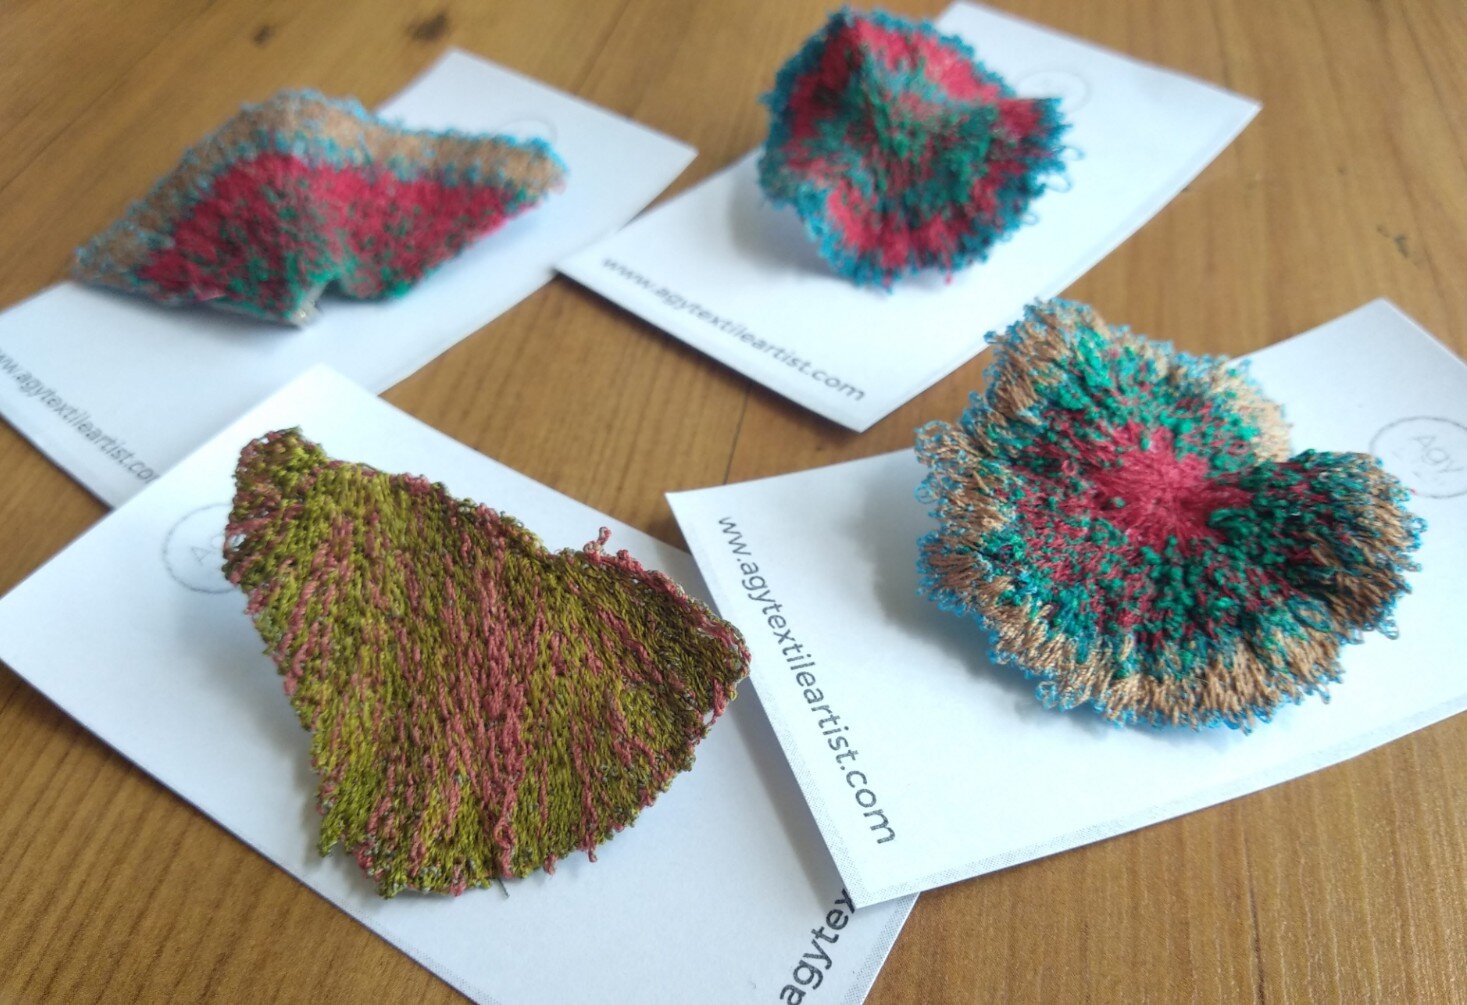 Wearable textile art created using free motion embroidery by Agy Textile Artist